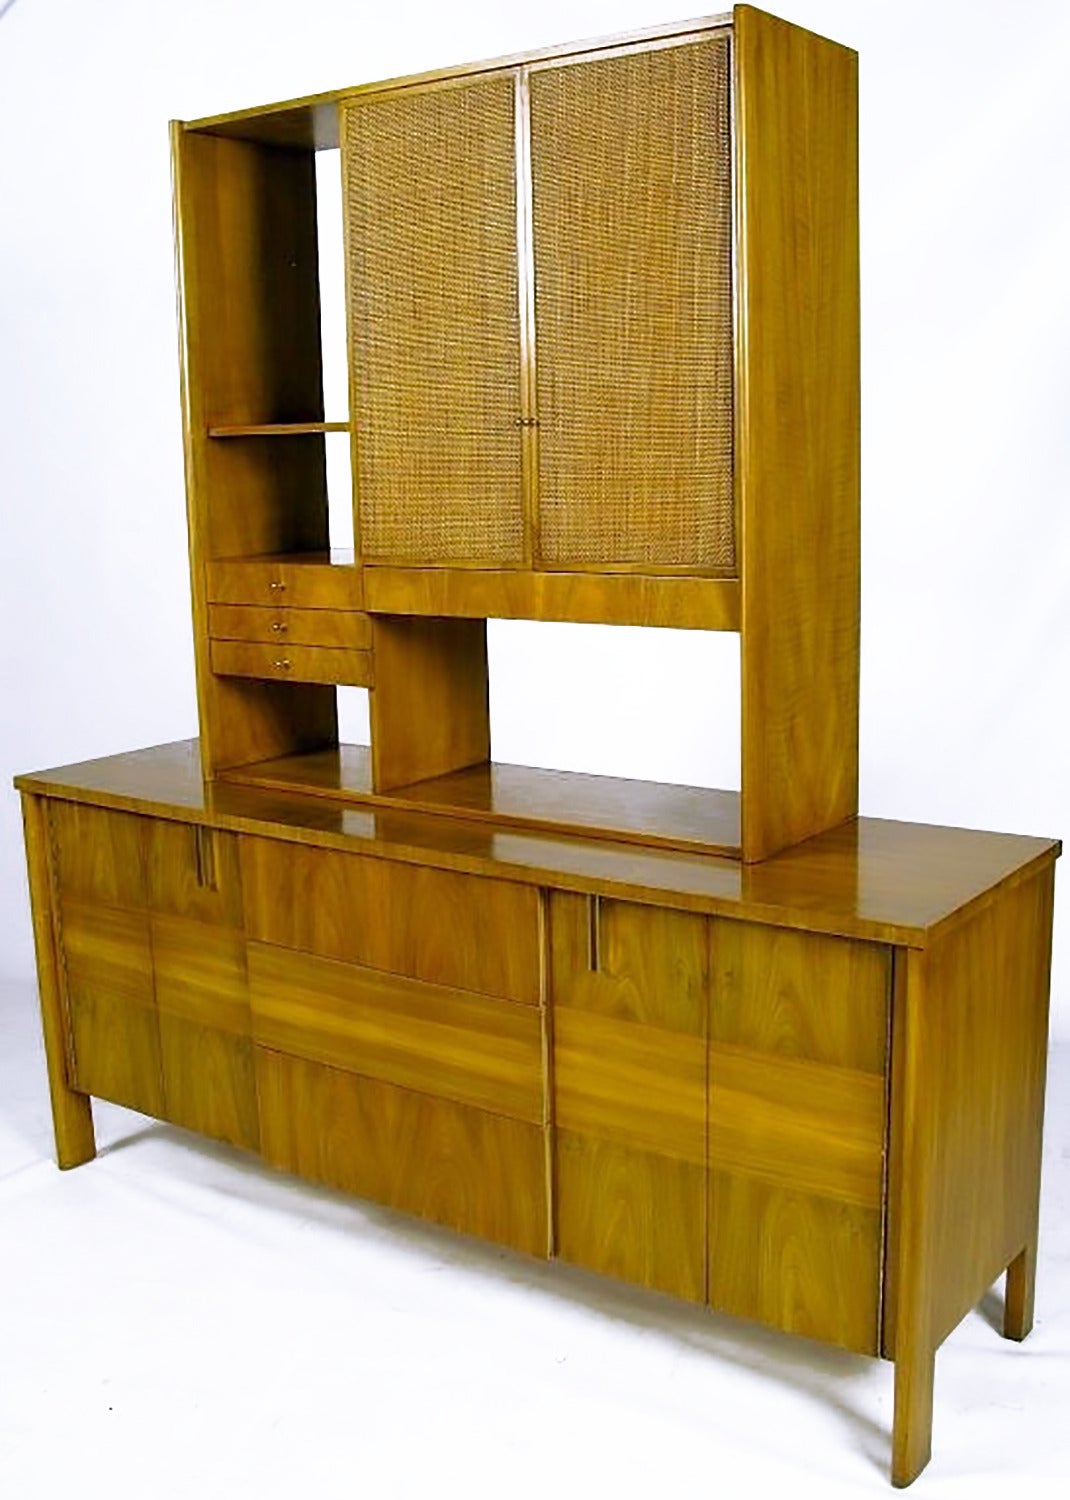 An excellent use of grain pattern and direction create a clean and striking cabinet from John Widdicomb. The cane front doors and open back of the upper piece create depth and add color. Can also be used as credenza. From designer Dale Ford's